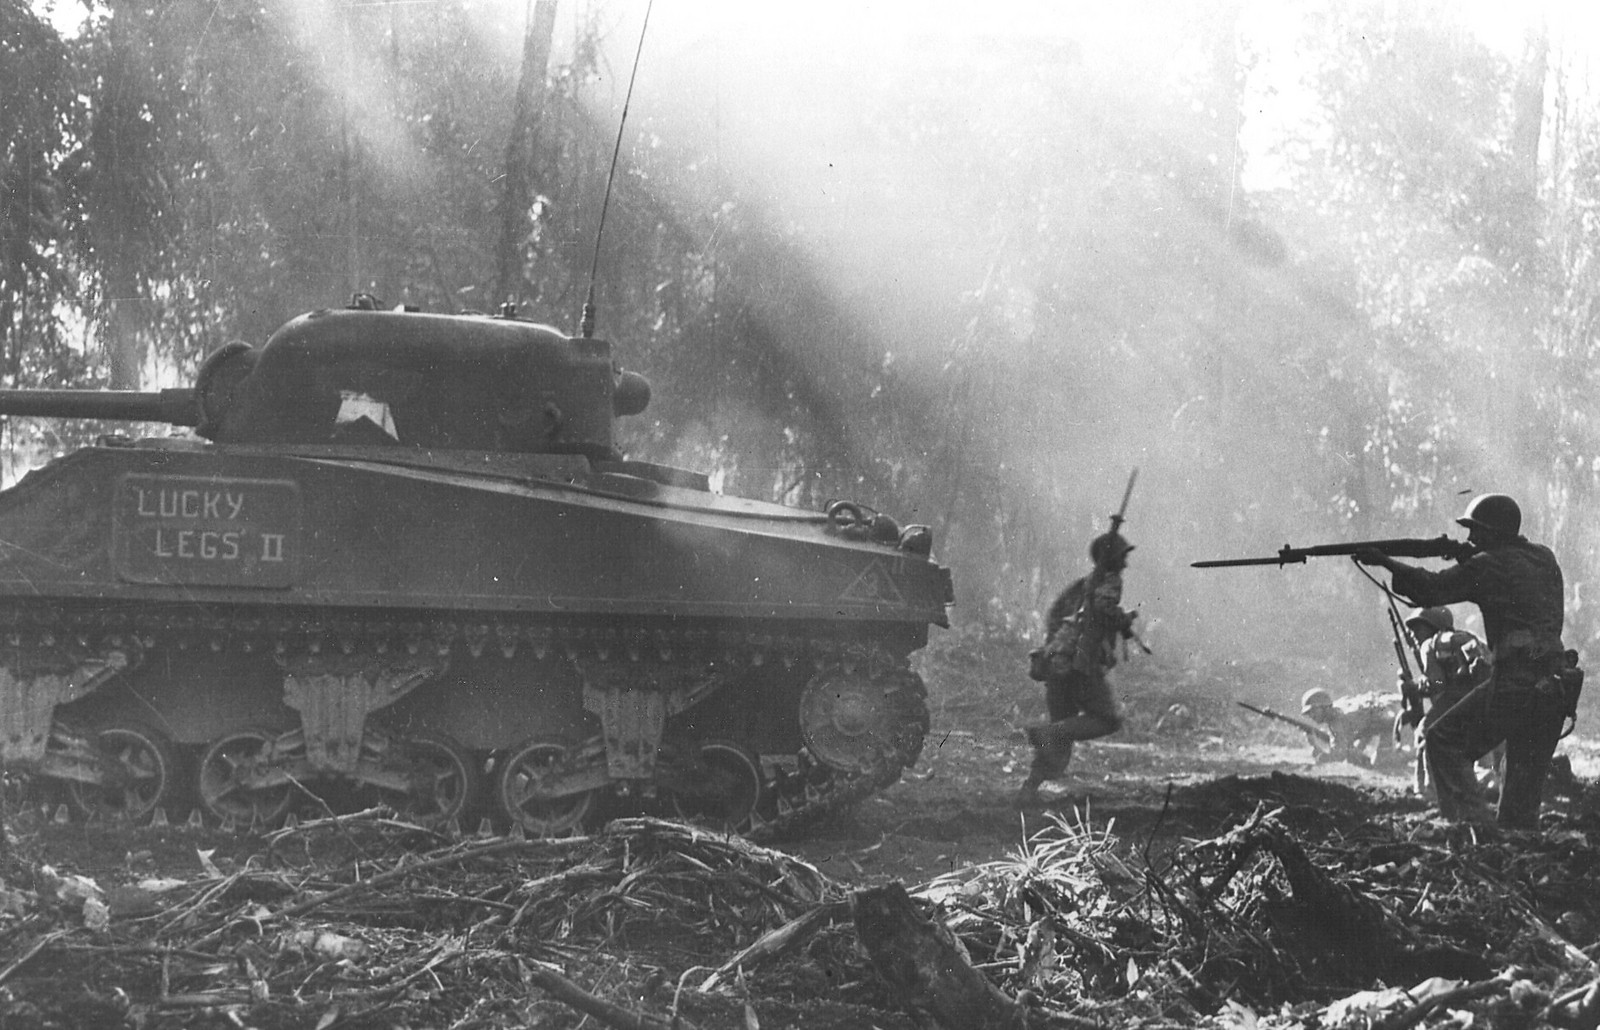 Tank-inf at Bougainville MAR44-X3